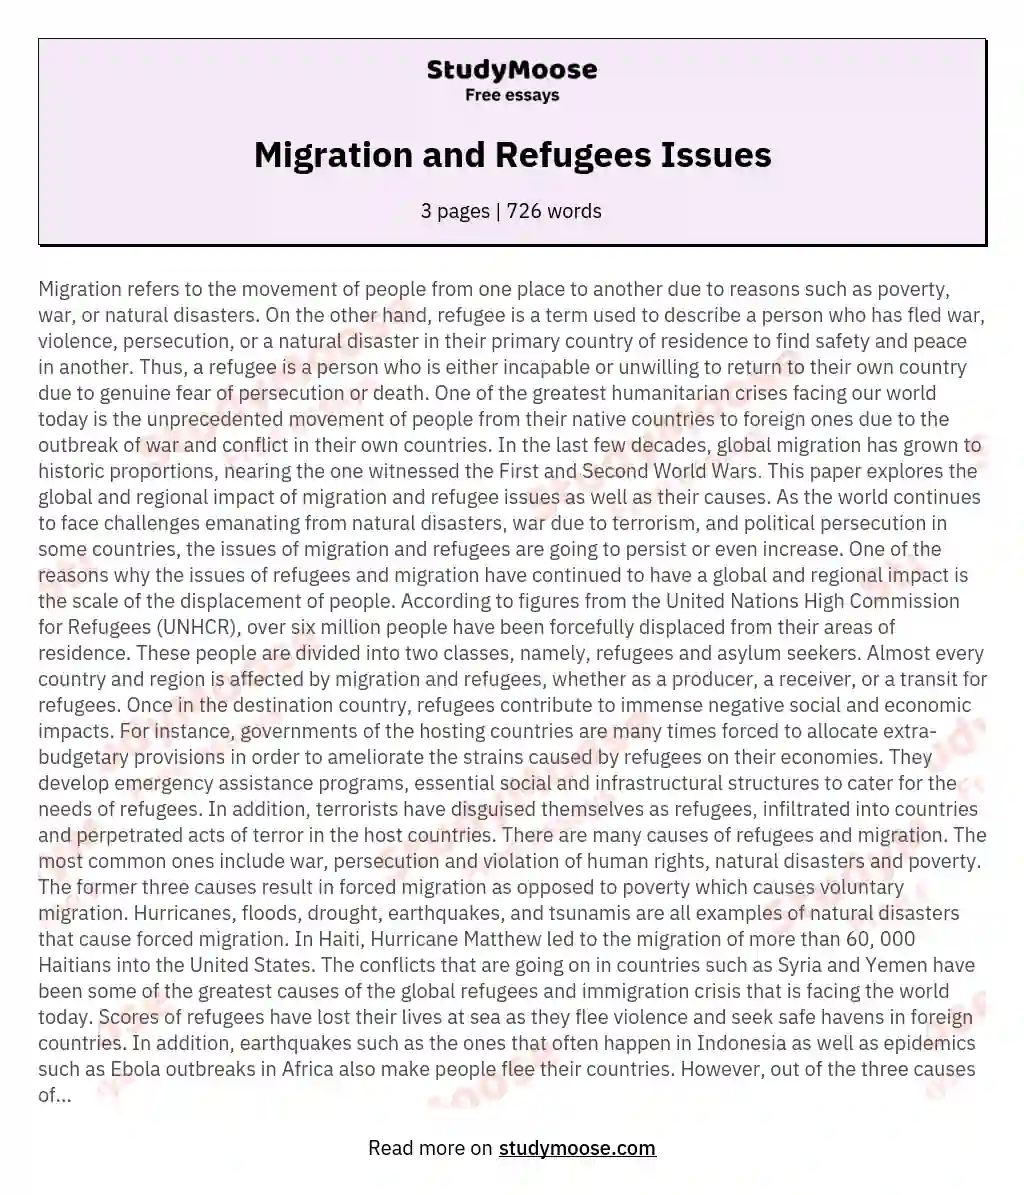 Migration and Refugees Issues essay